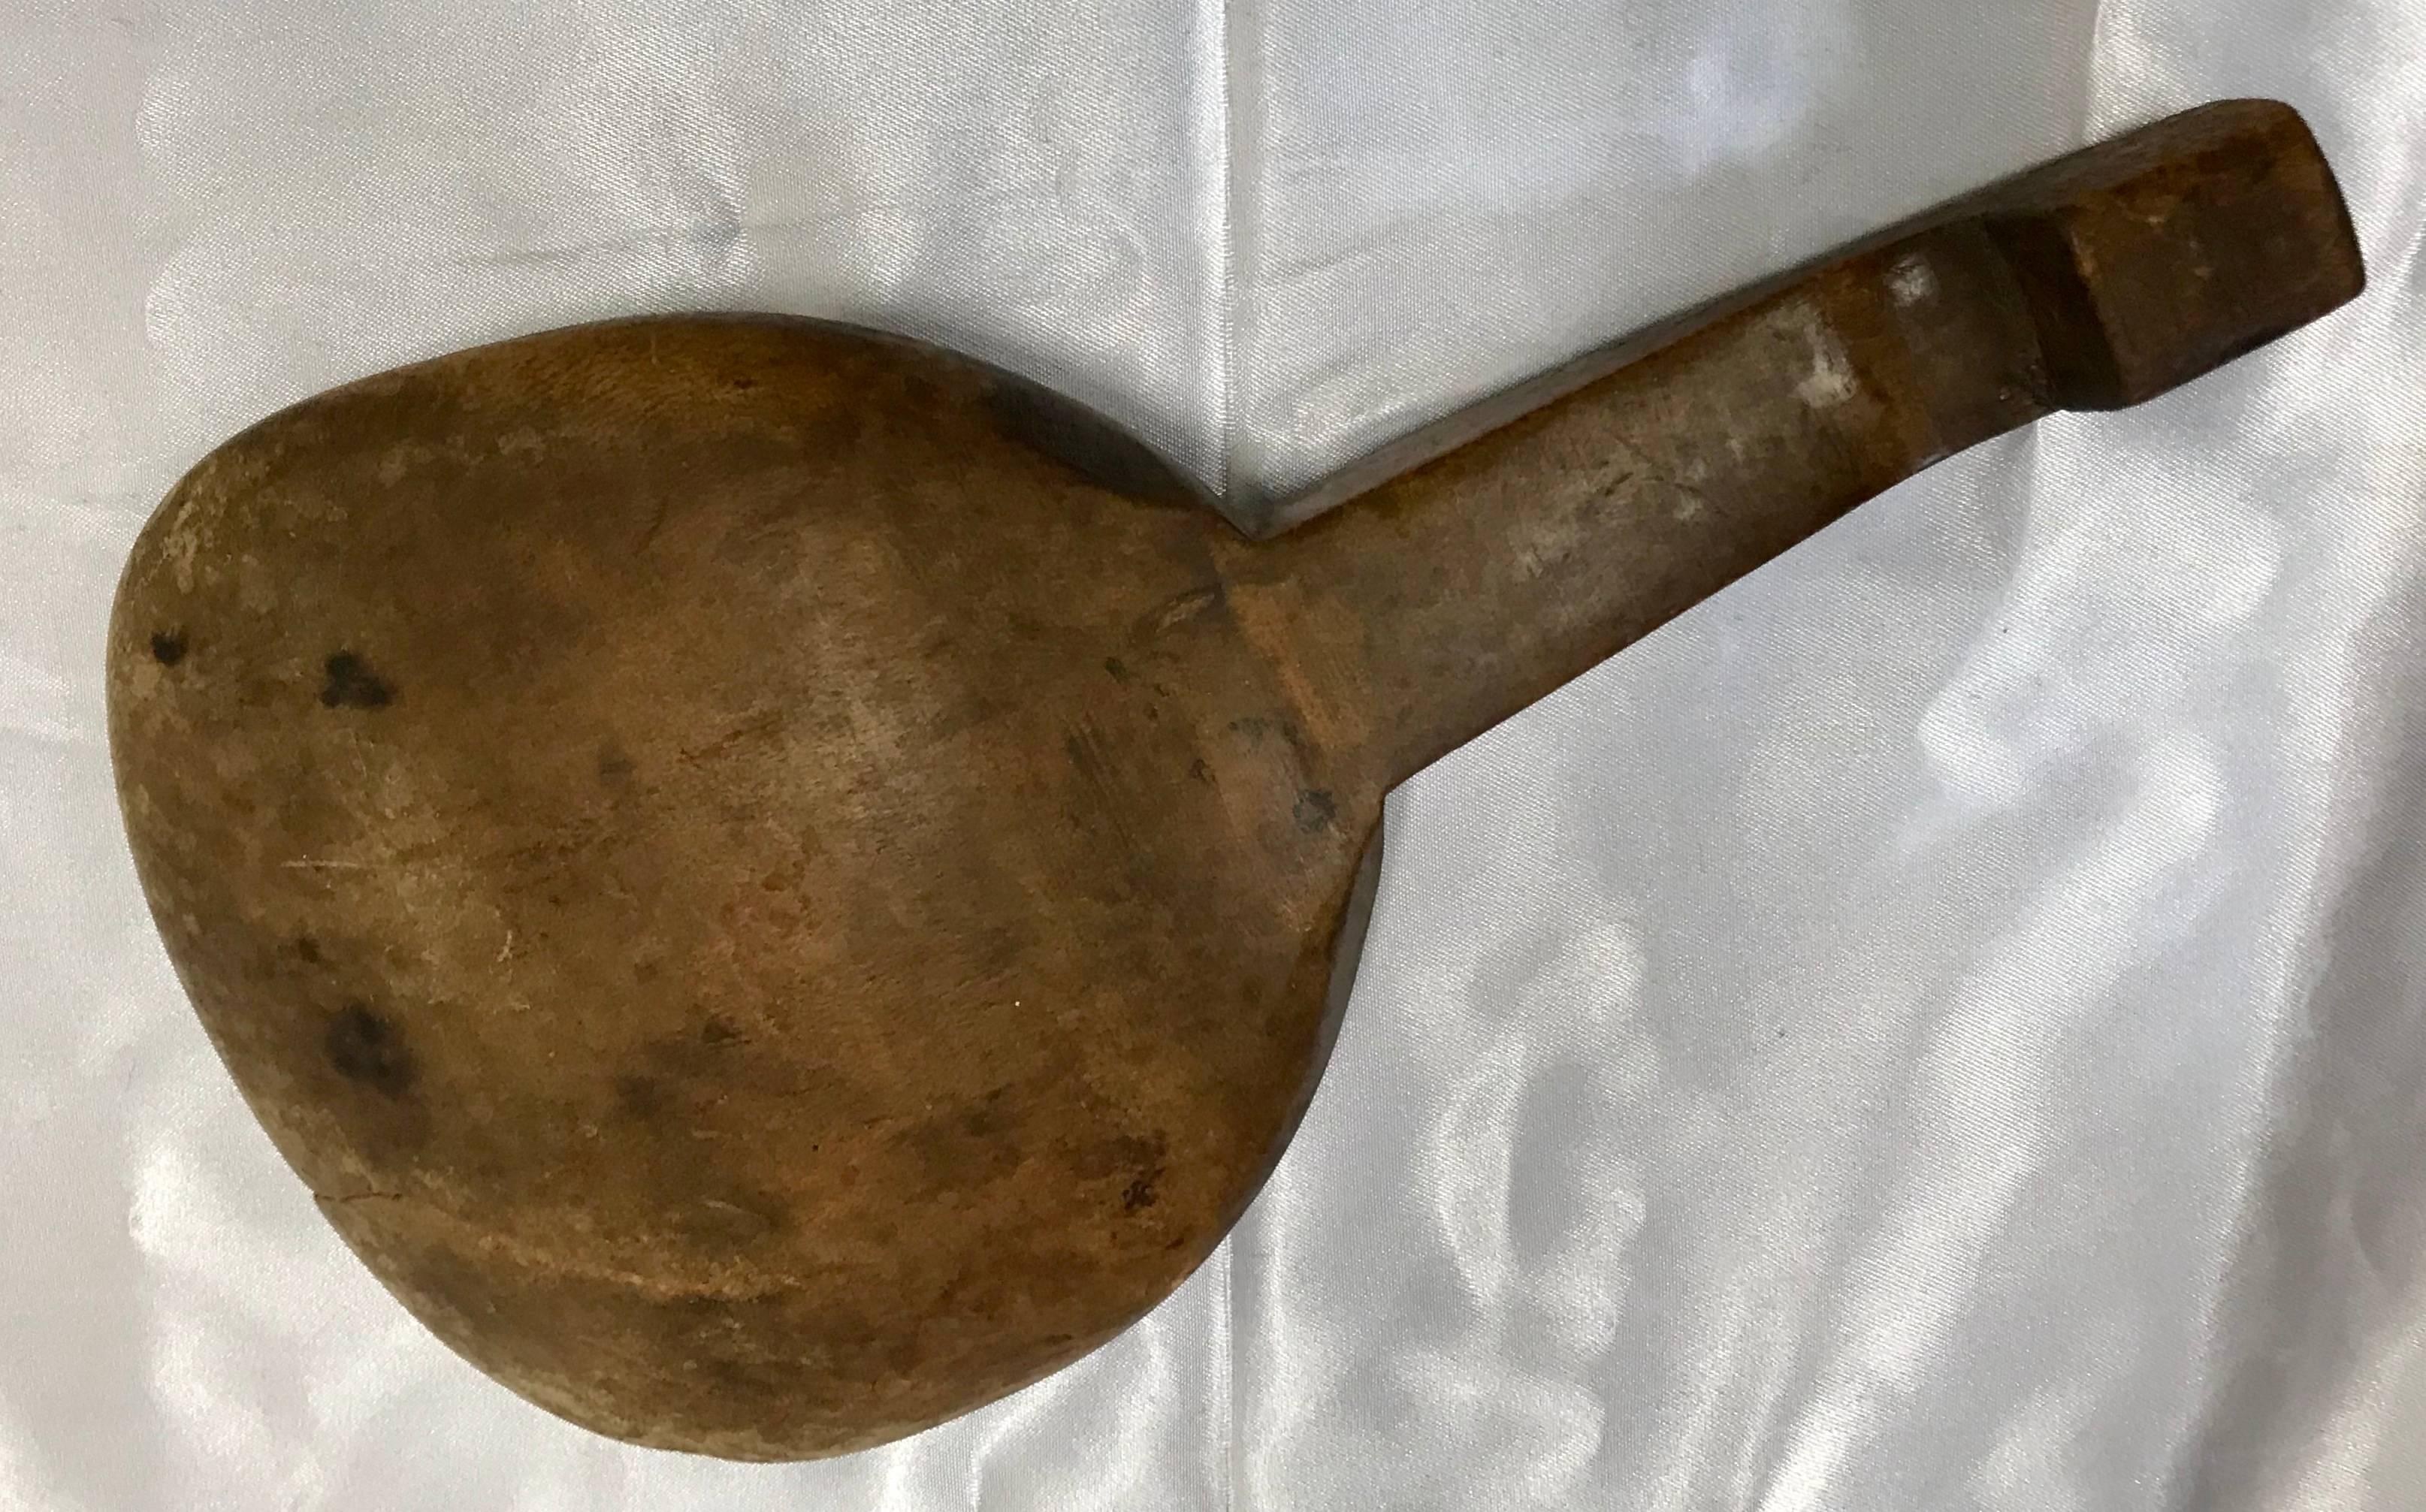 Featured is a spoon or paddle from France during the late 19th century. You can determine from the wear on the edge that it was used many times to give it a beautiful primitive patina. The handle boasts a lip on the end to easily hang it to the edge